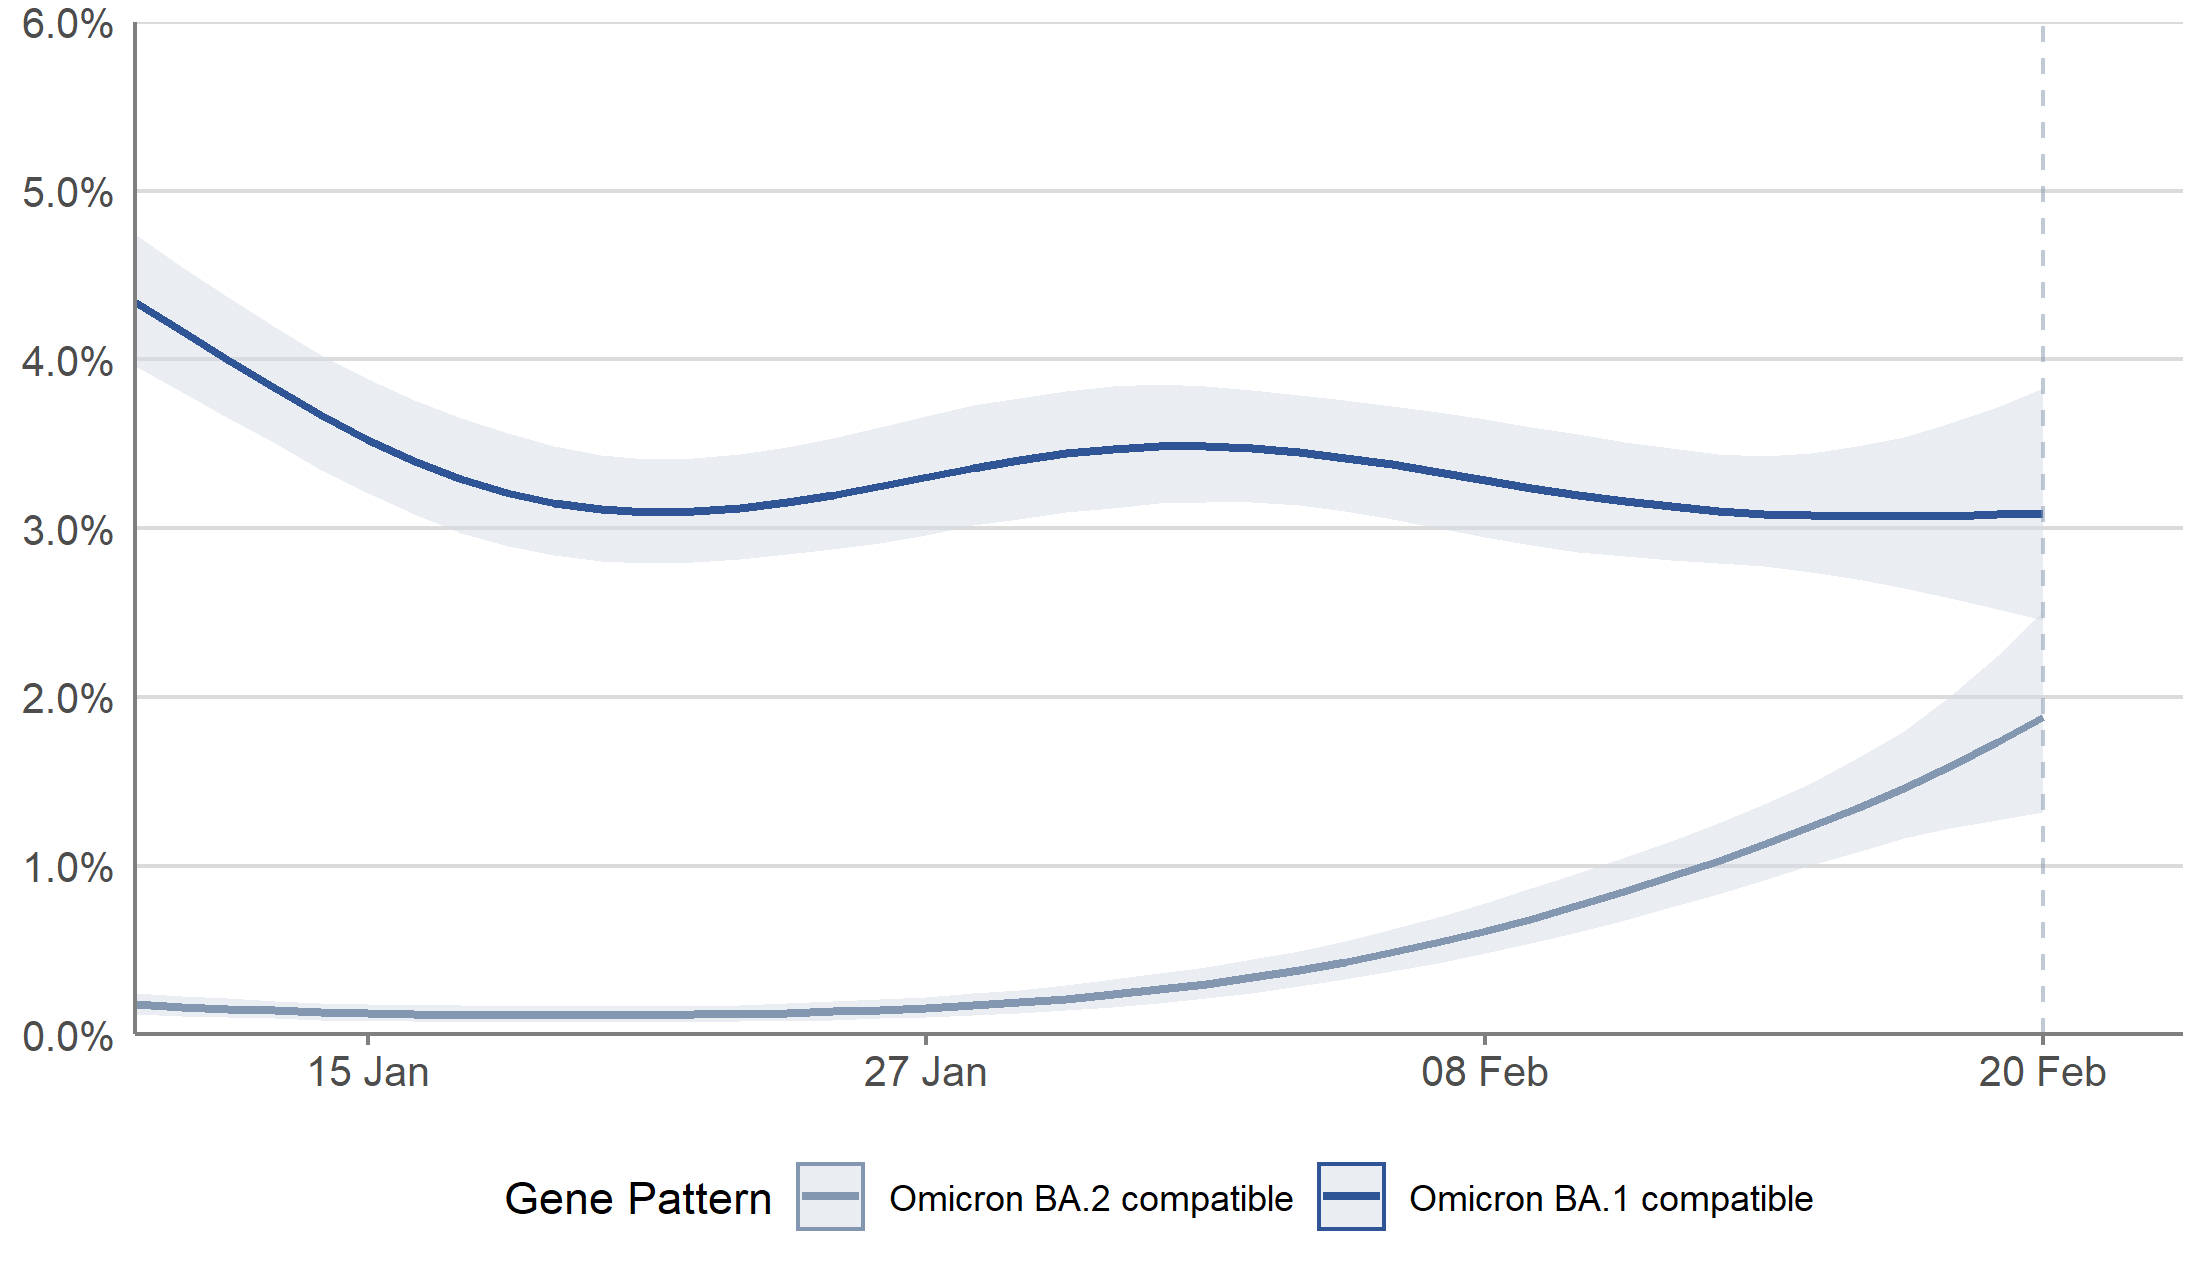 In Scotland, the percentage of people testing positive with cases compatible with Omicron BA.2 has increased in the most recent week. The percentage of people testing positive with cases compatible with Omicron BA.1 has decreased in the most recent two weeks, but the trend is uncertain in the most recent week.